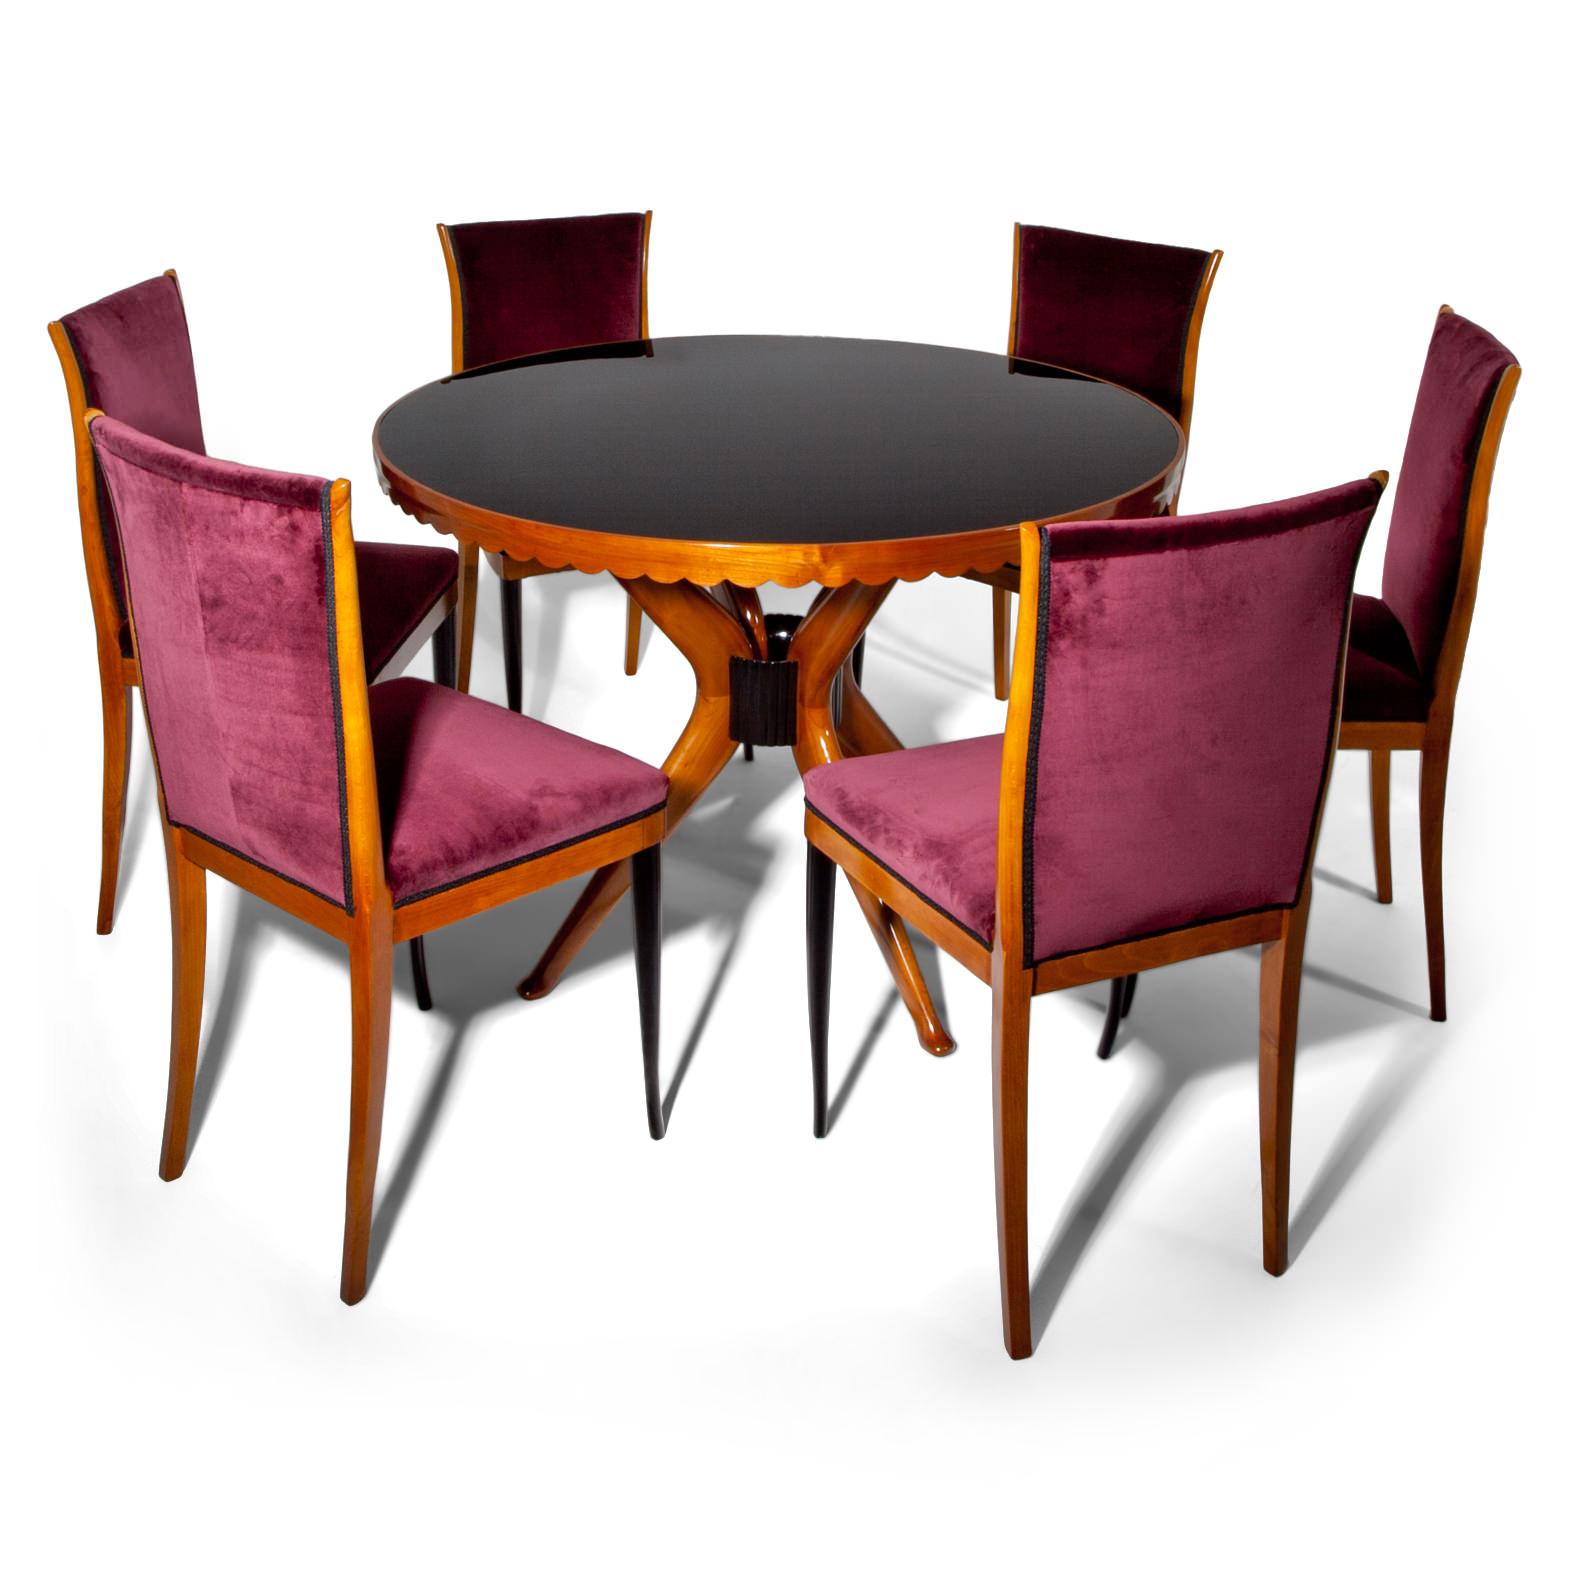 Set of six dining room chairs with ebonized front legs and Bordeaux colored upholstery on seat and backrests.